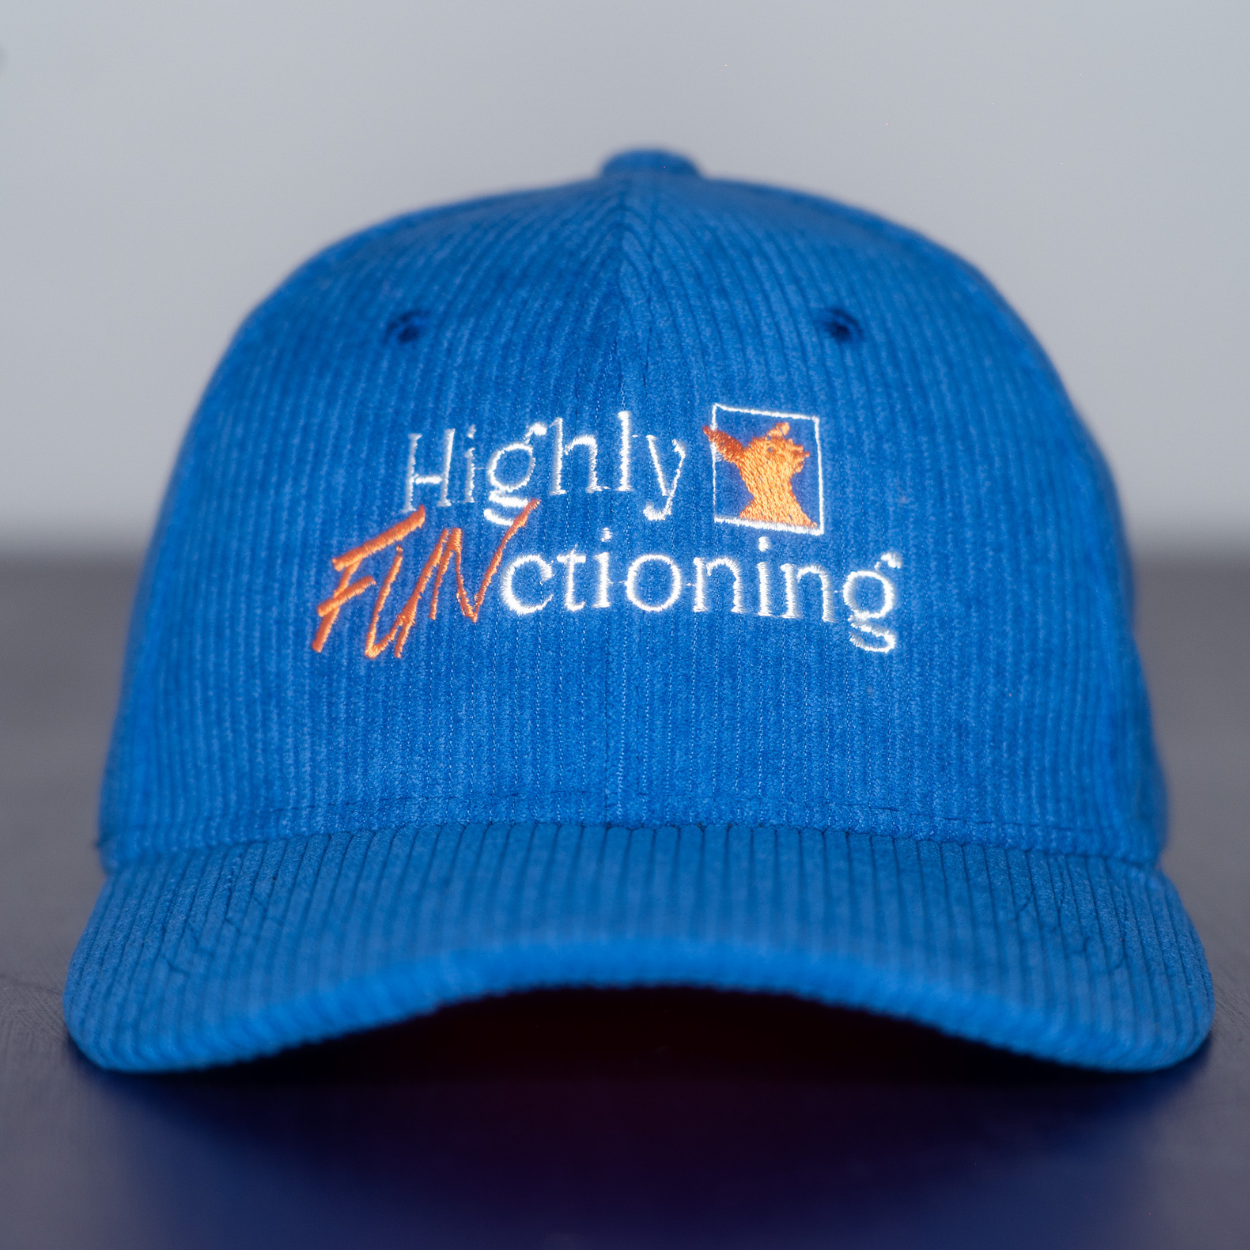 Retro Corduroy Cap - "Highy FUNctioning" Embroidered Hat